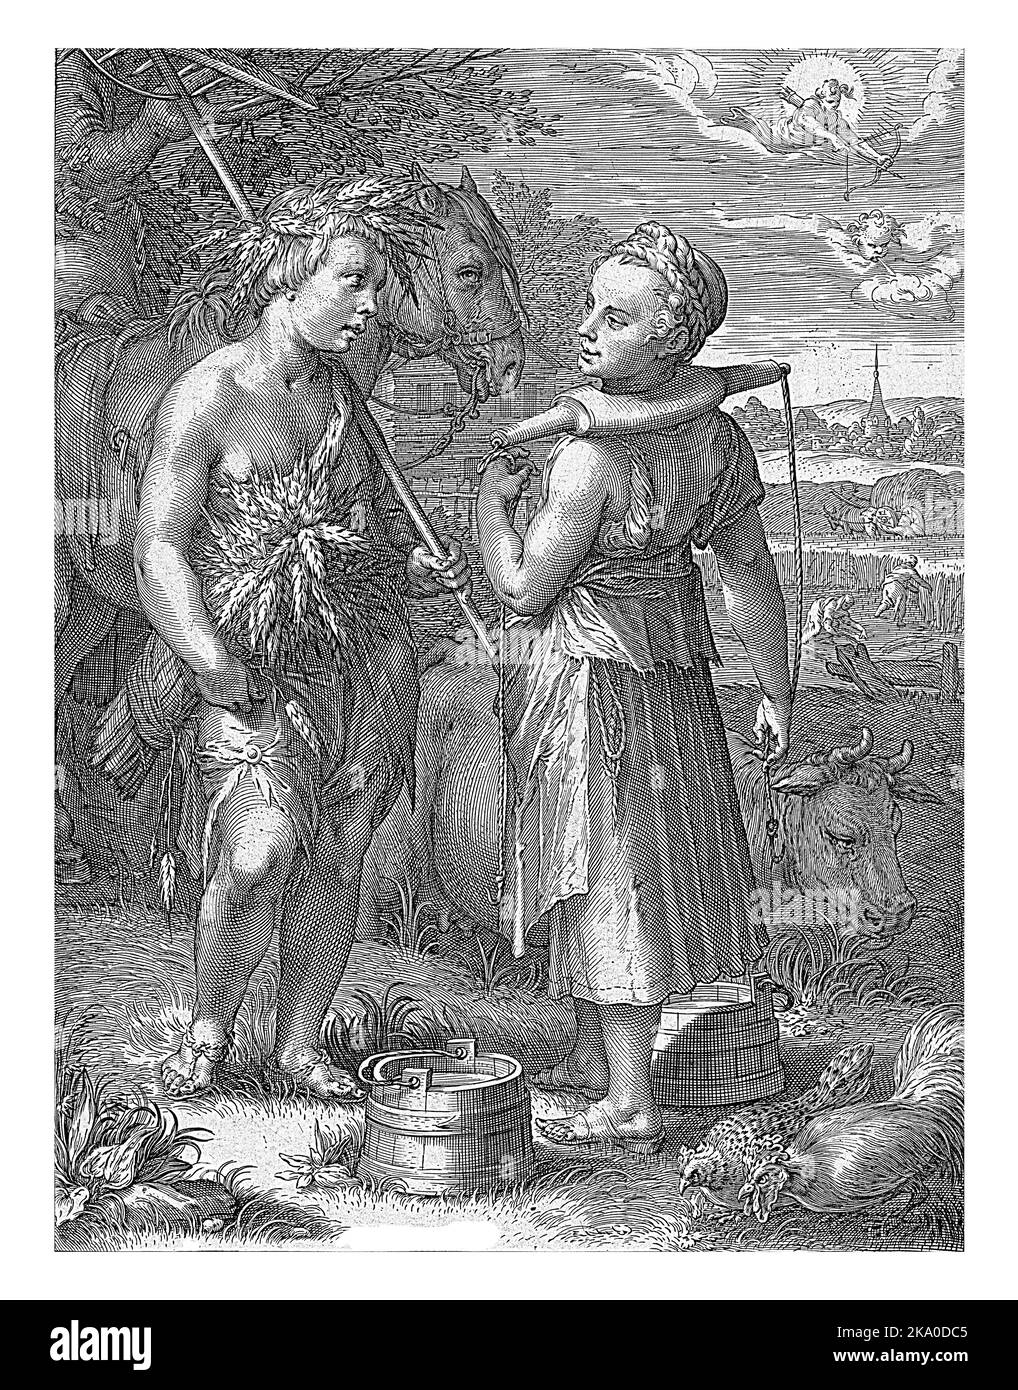 Meeting between a milkmaid and a farm boy in a landscape. The girl stands with a yoke on her shoulders, the boy carries ears of corn in her hair. Stock Photo